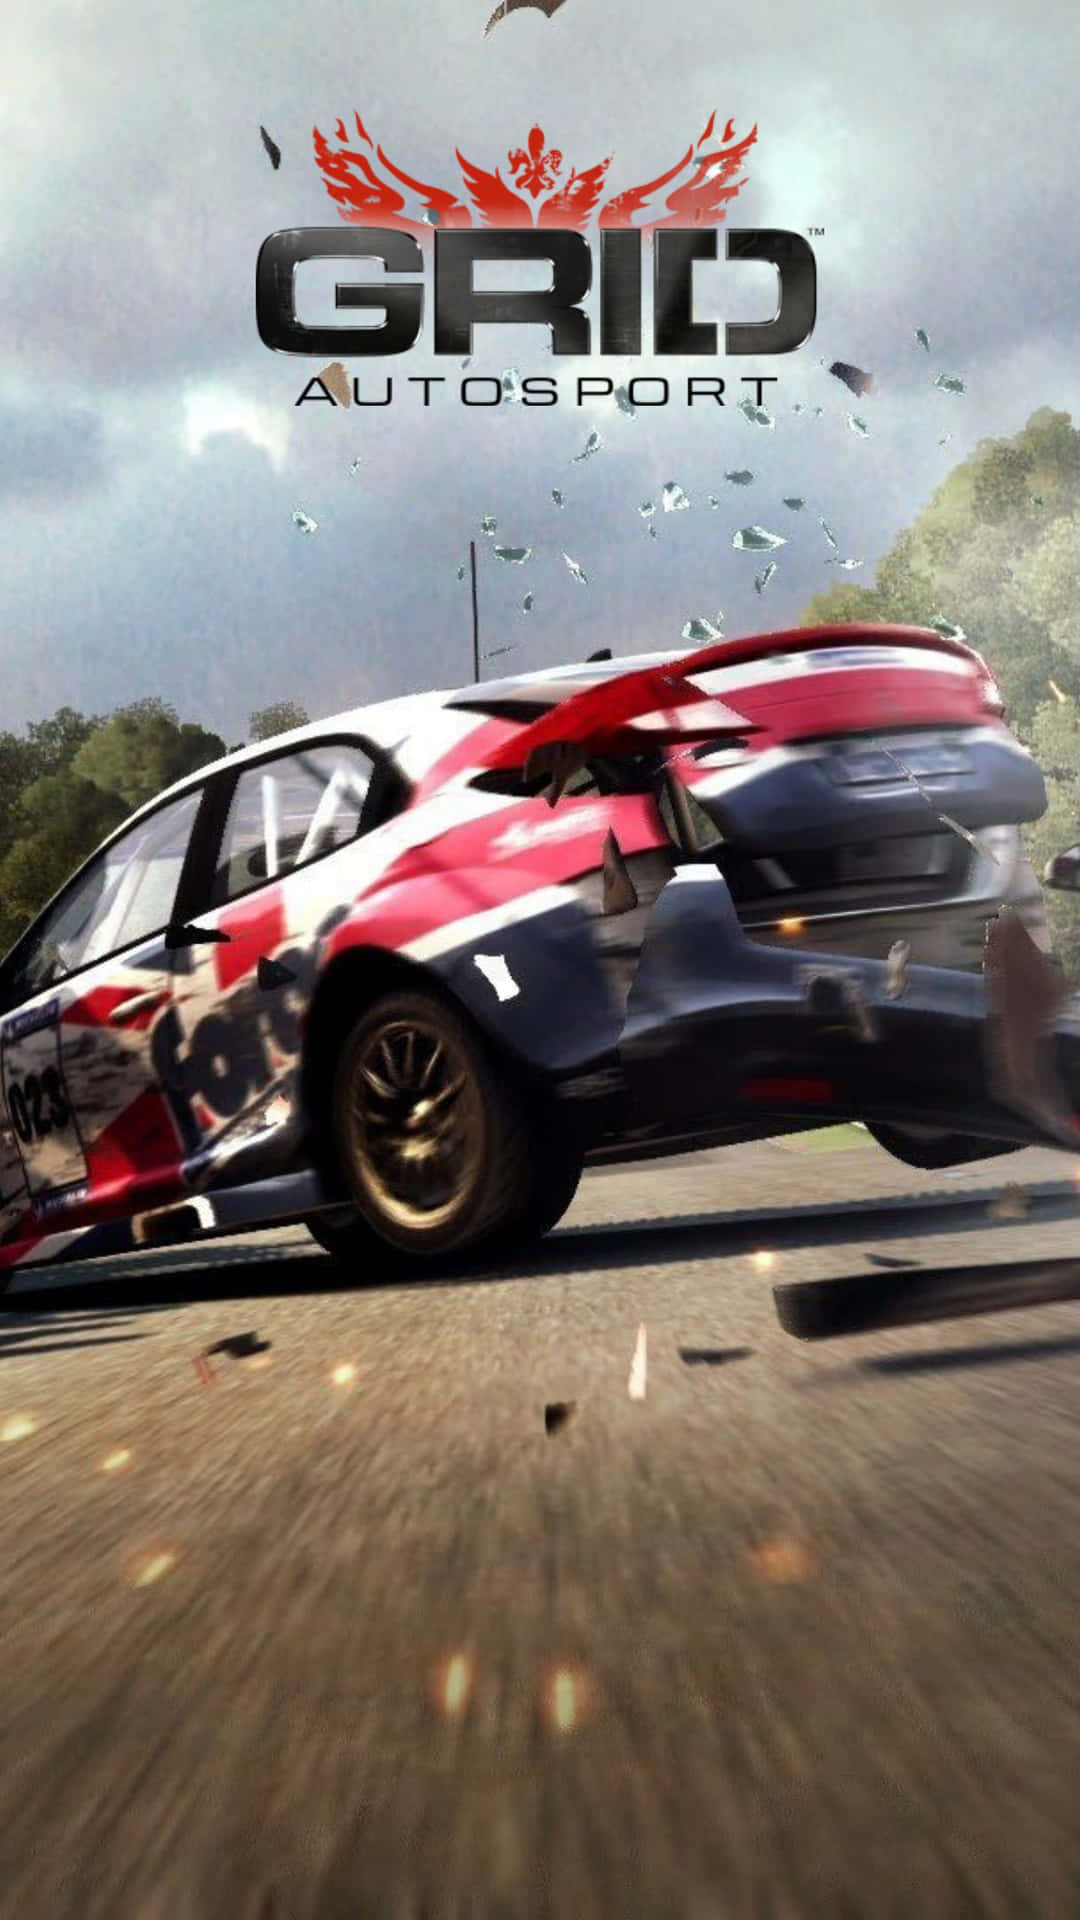 Experience high-quality visuals and realistic racing in Android Grid Autosport